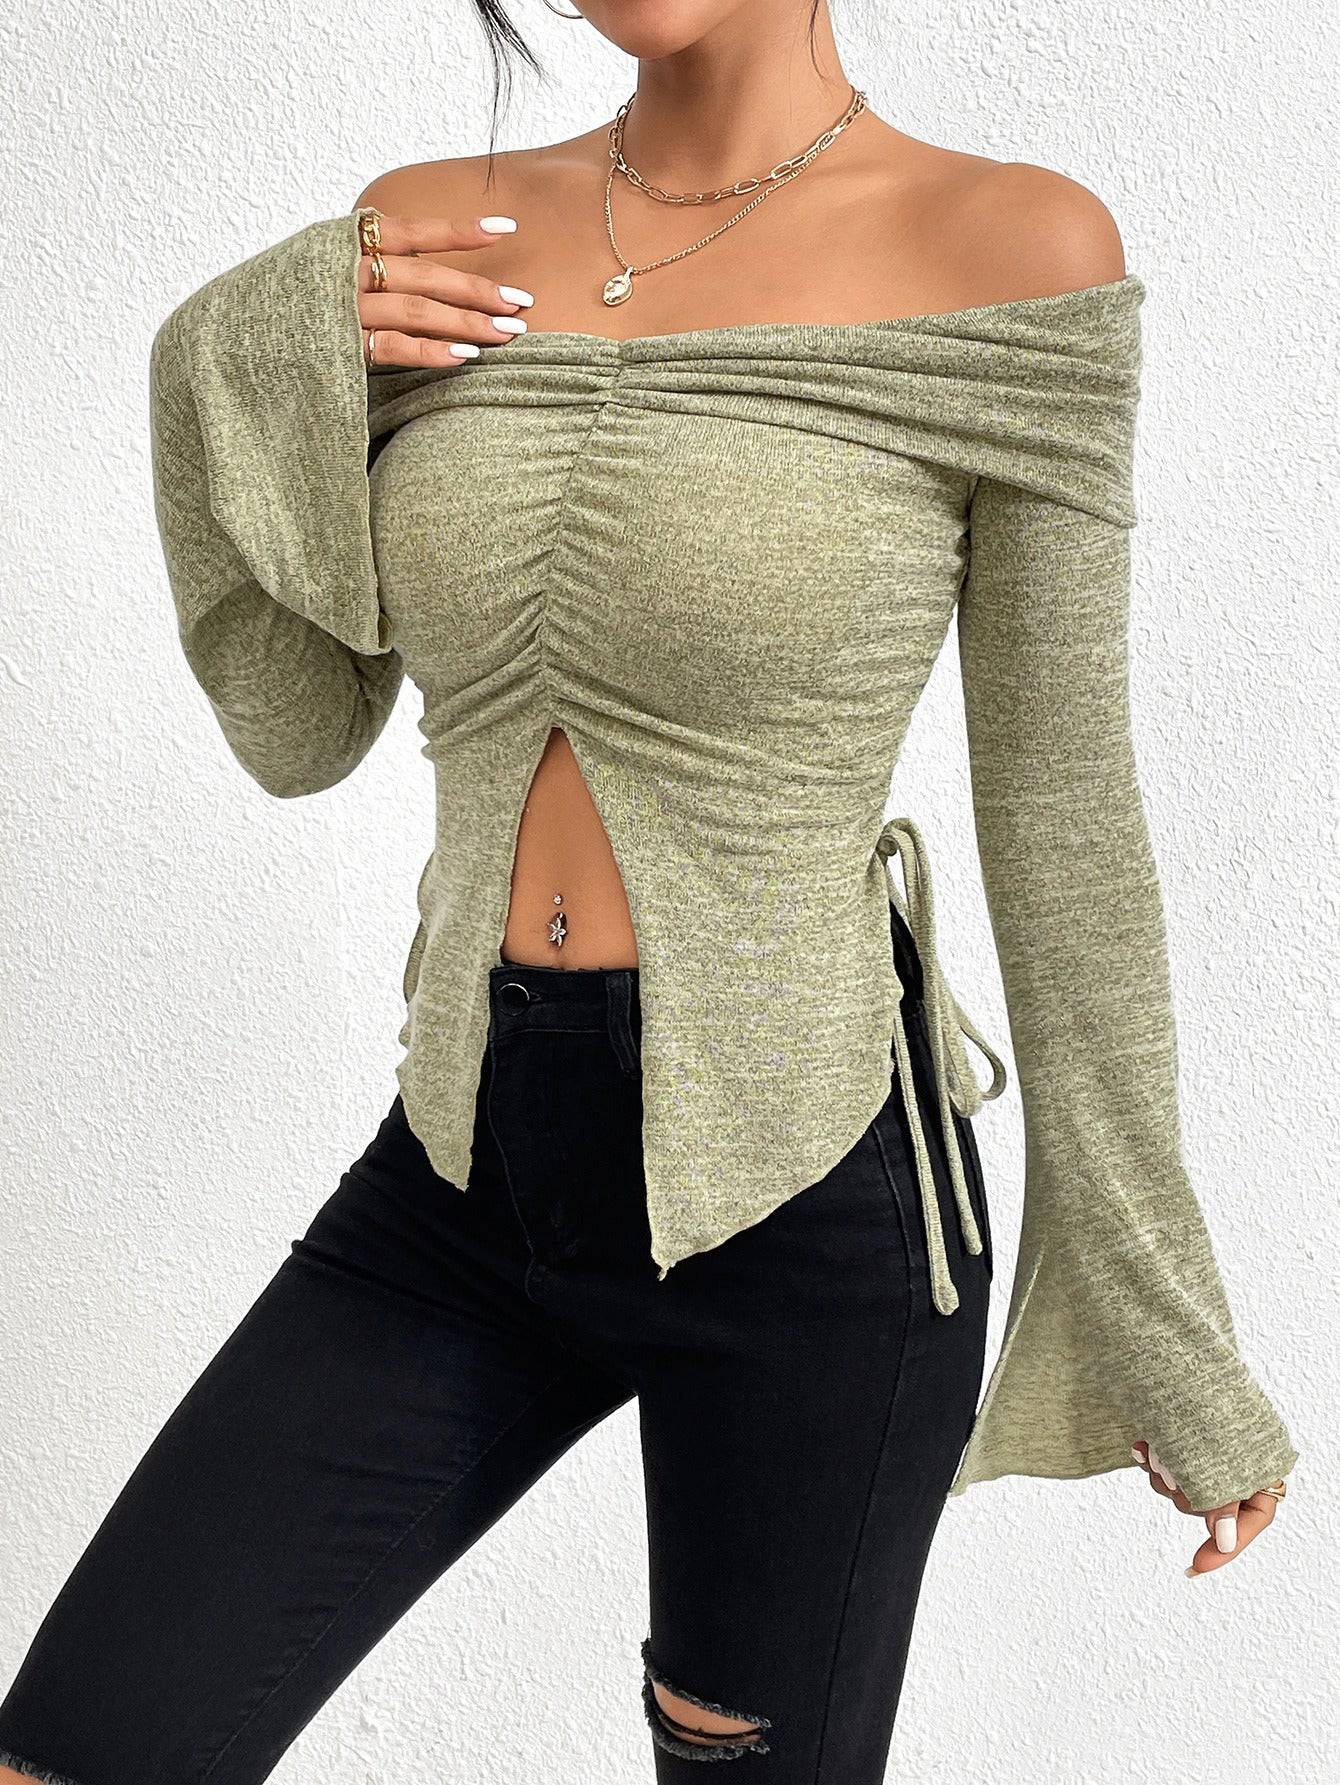 One line neckline split flared sleeve long sleeved knitted T-shirt top - Hot fashionista